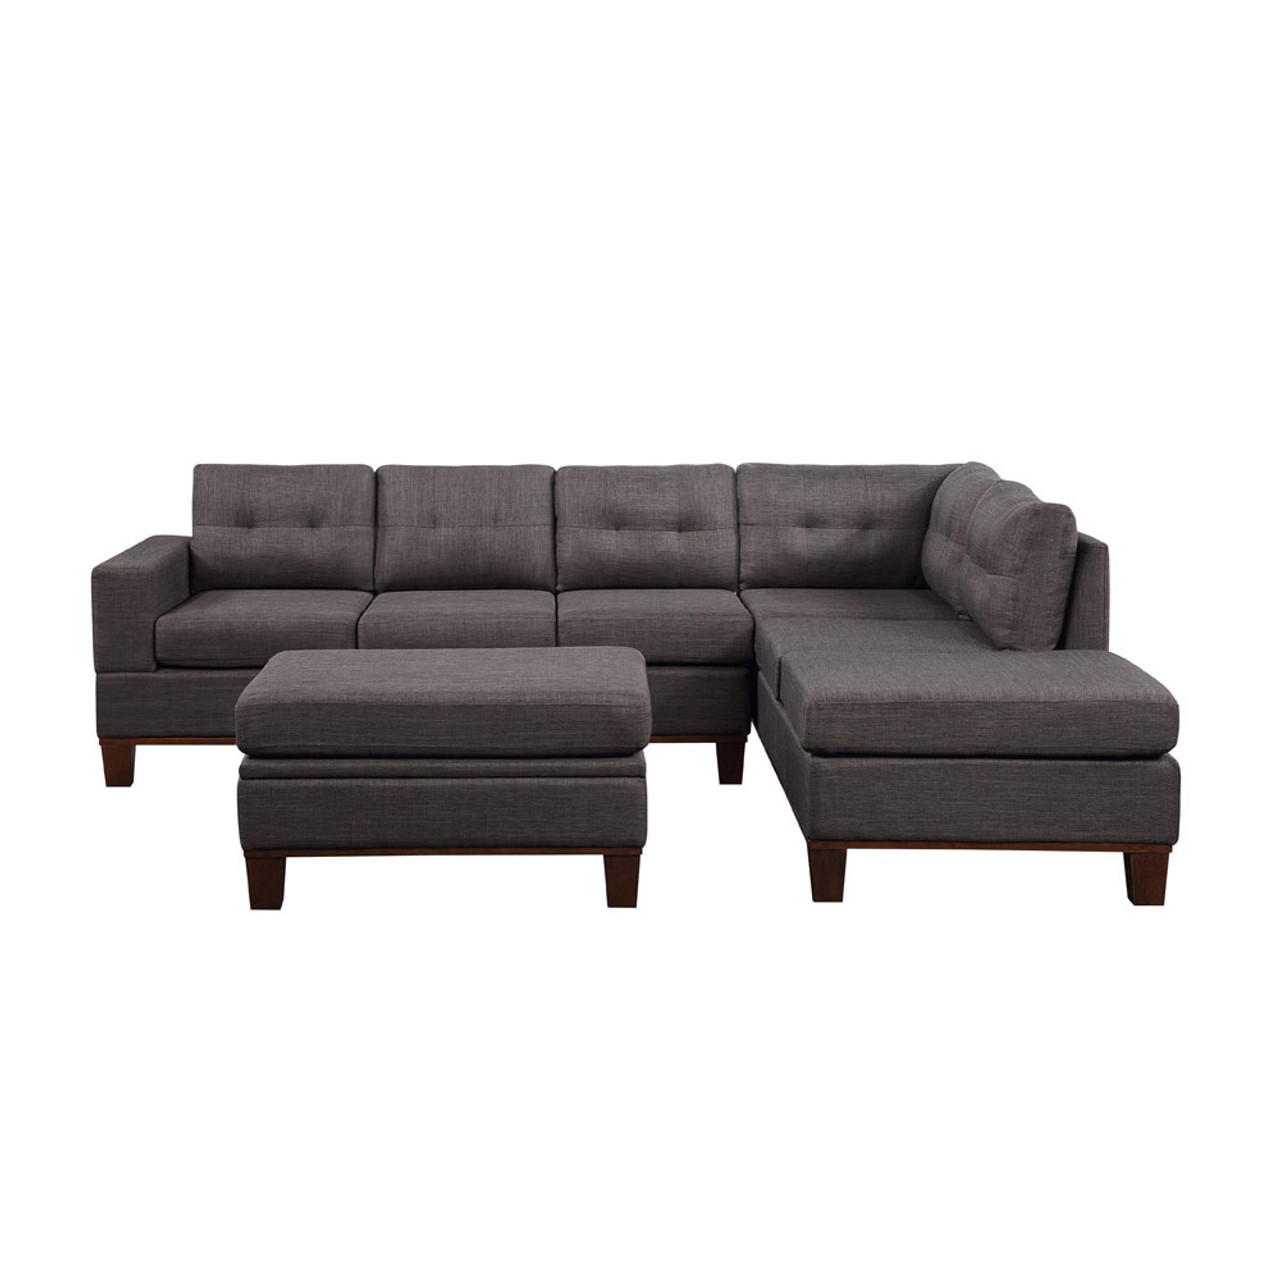 Lilola Home Hilo Dark Gray Fabric Reversible Sectional Sofa with Dropdown Armrest, Cupholder, and Storage Ottoman 87721